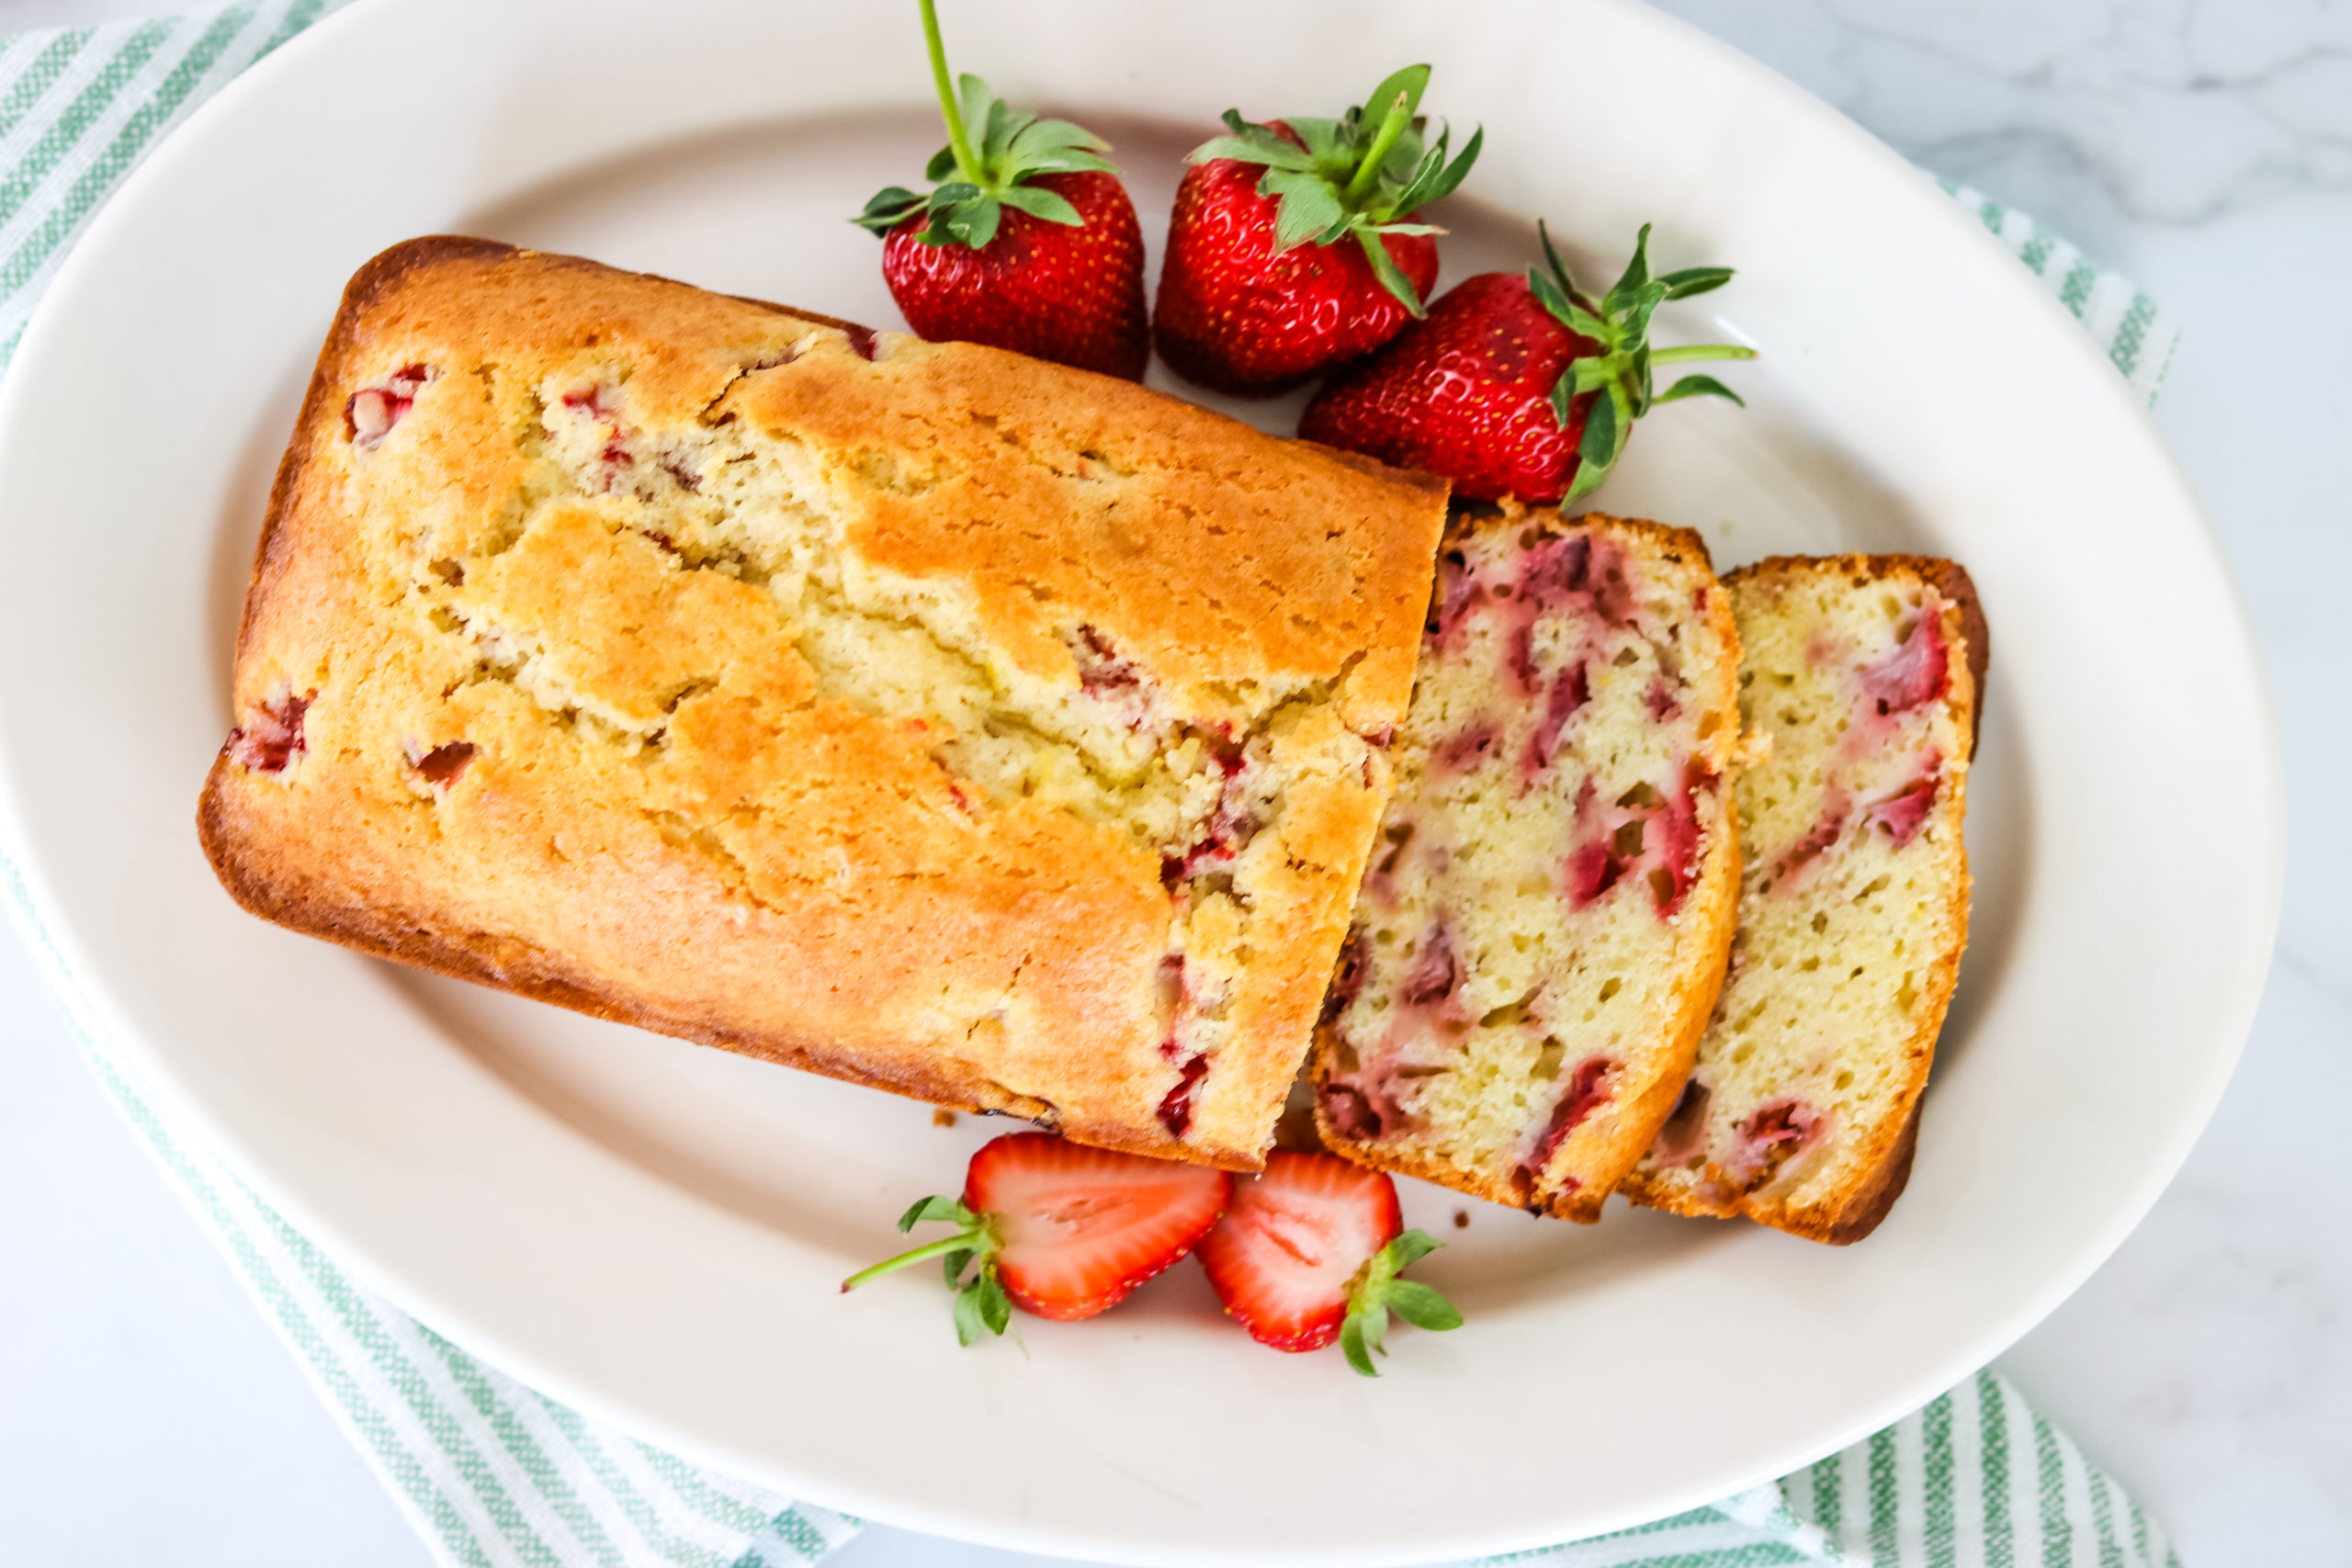 Top shot of the Strawberry Bread.